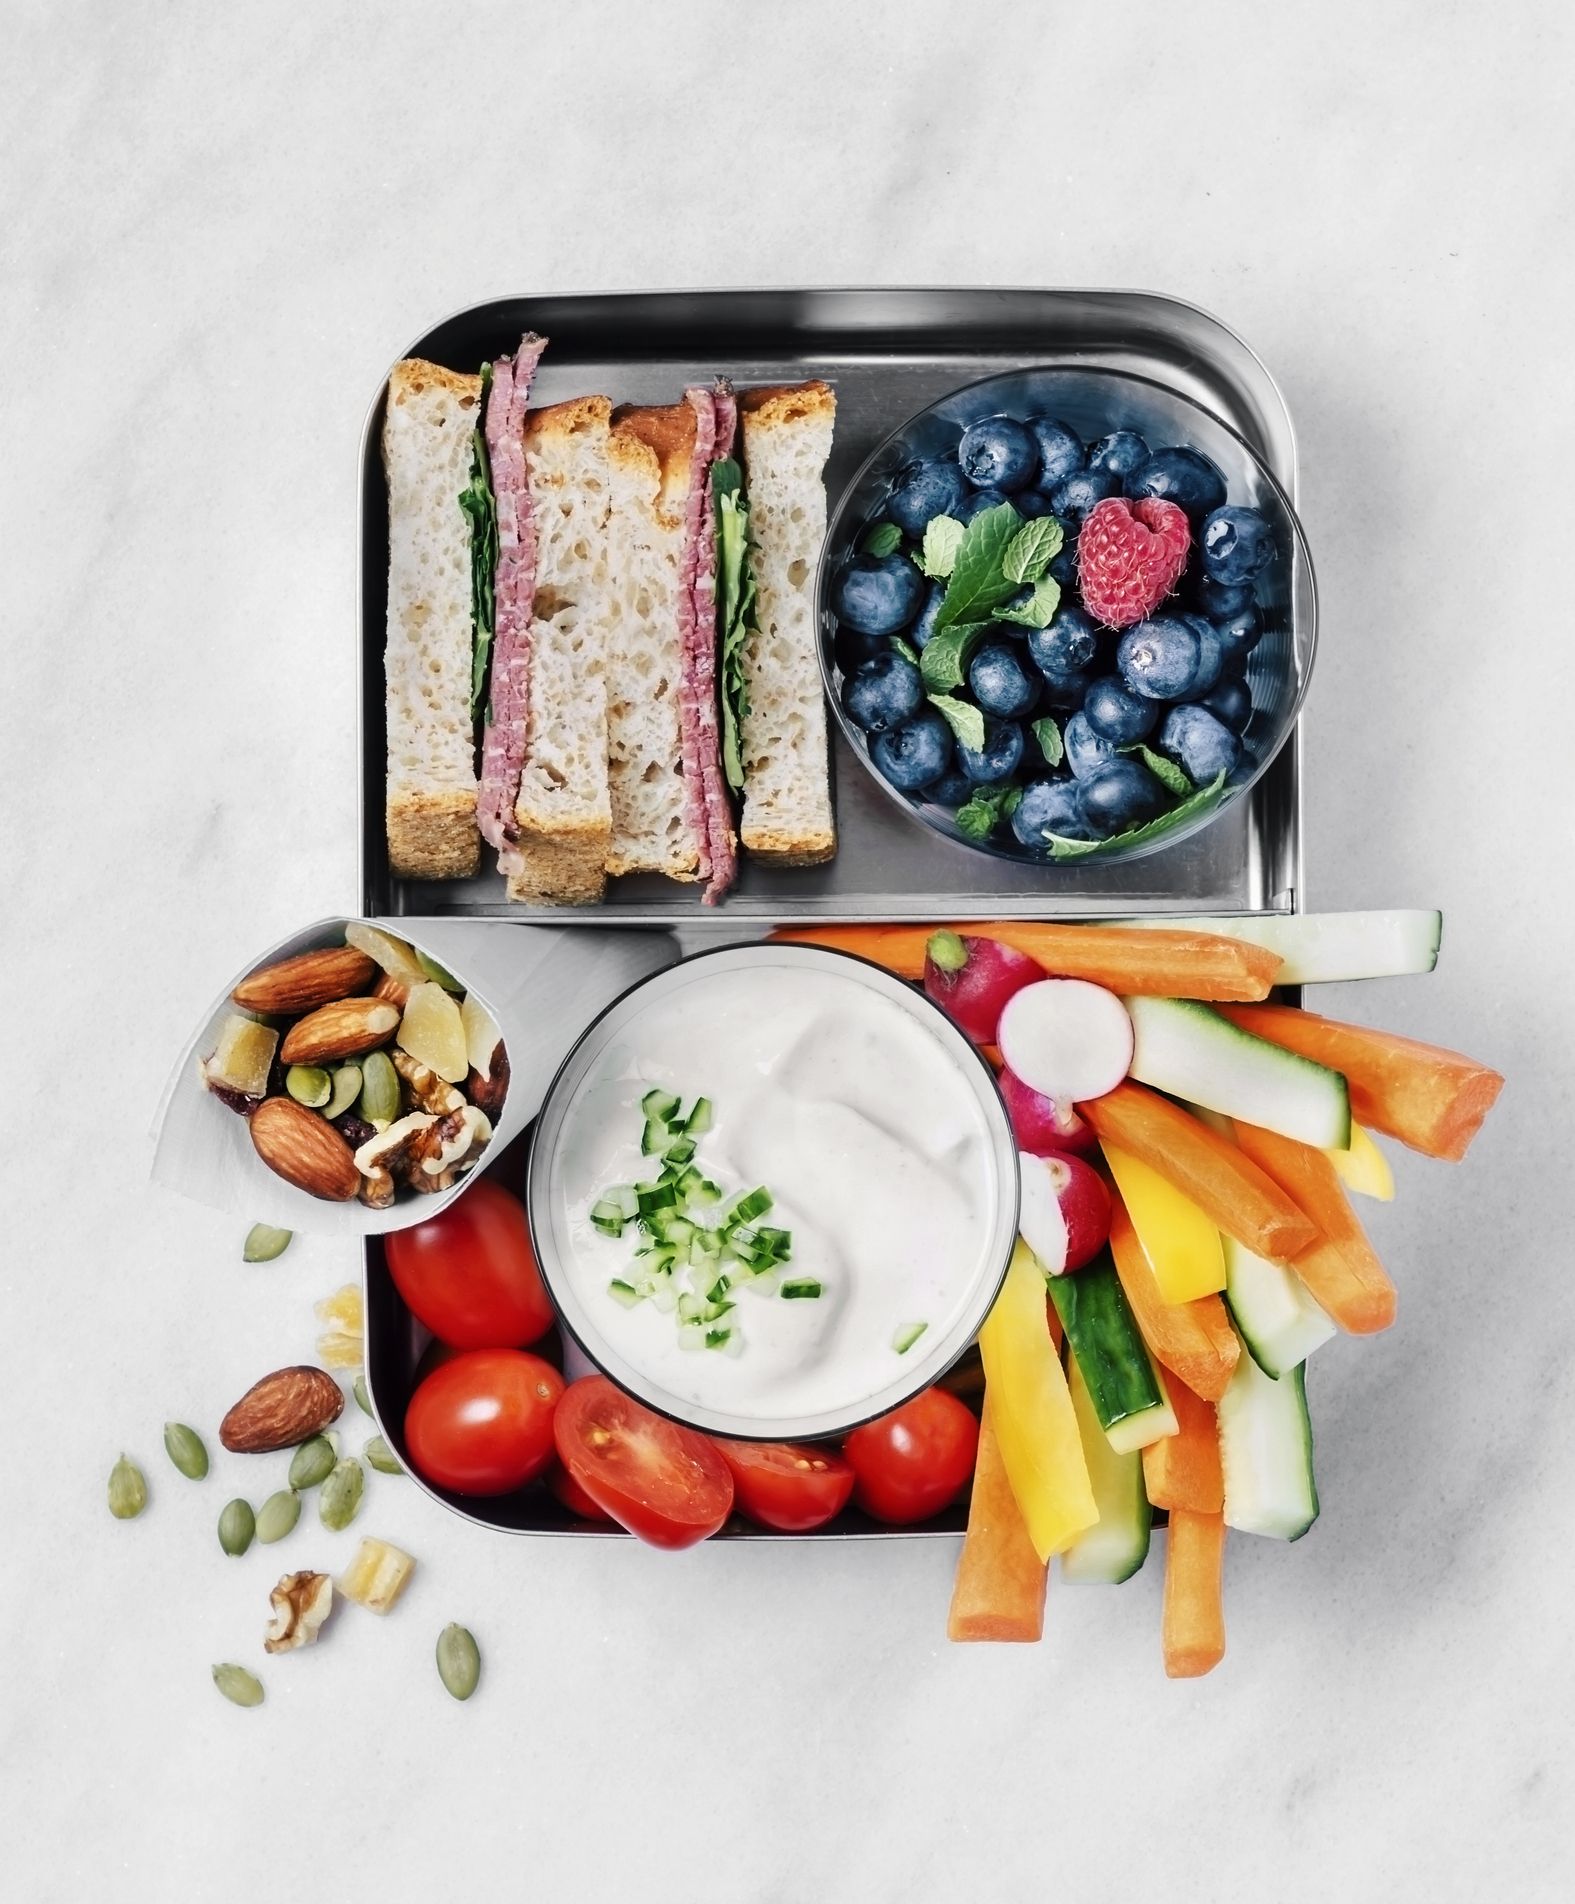 Clean-Eating Lunch Ideas for Work